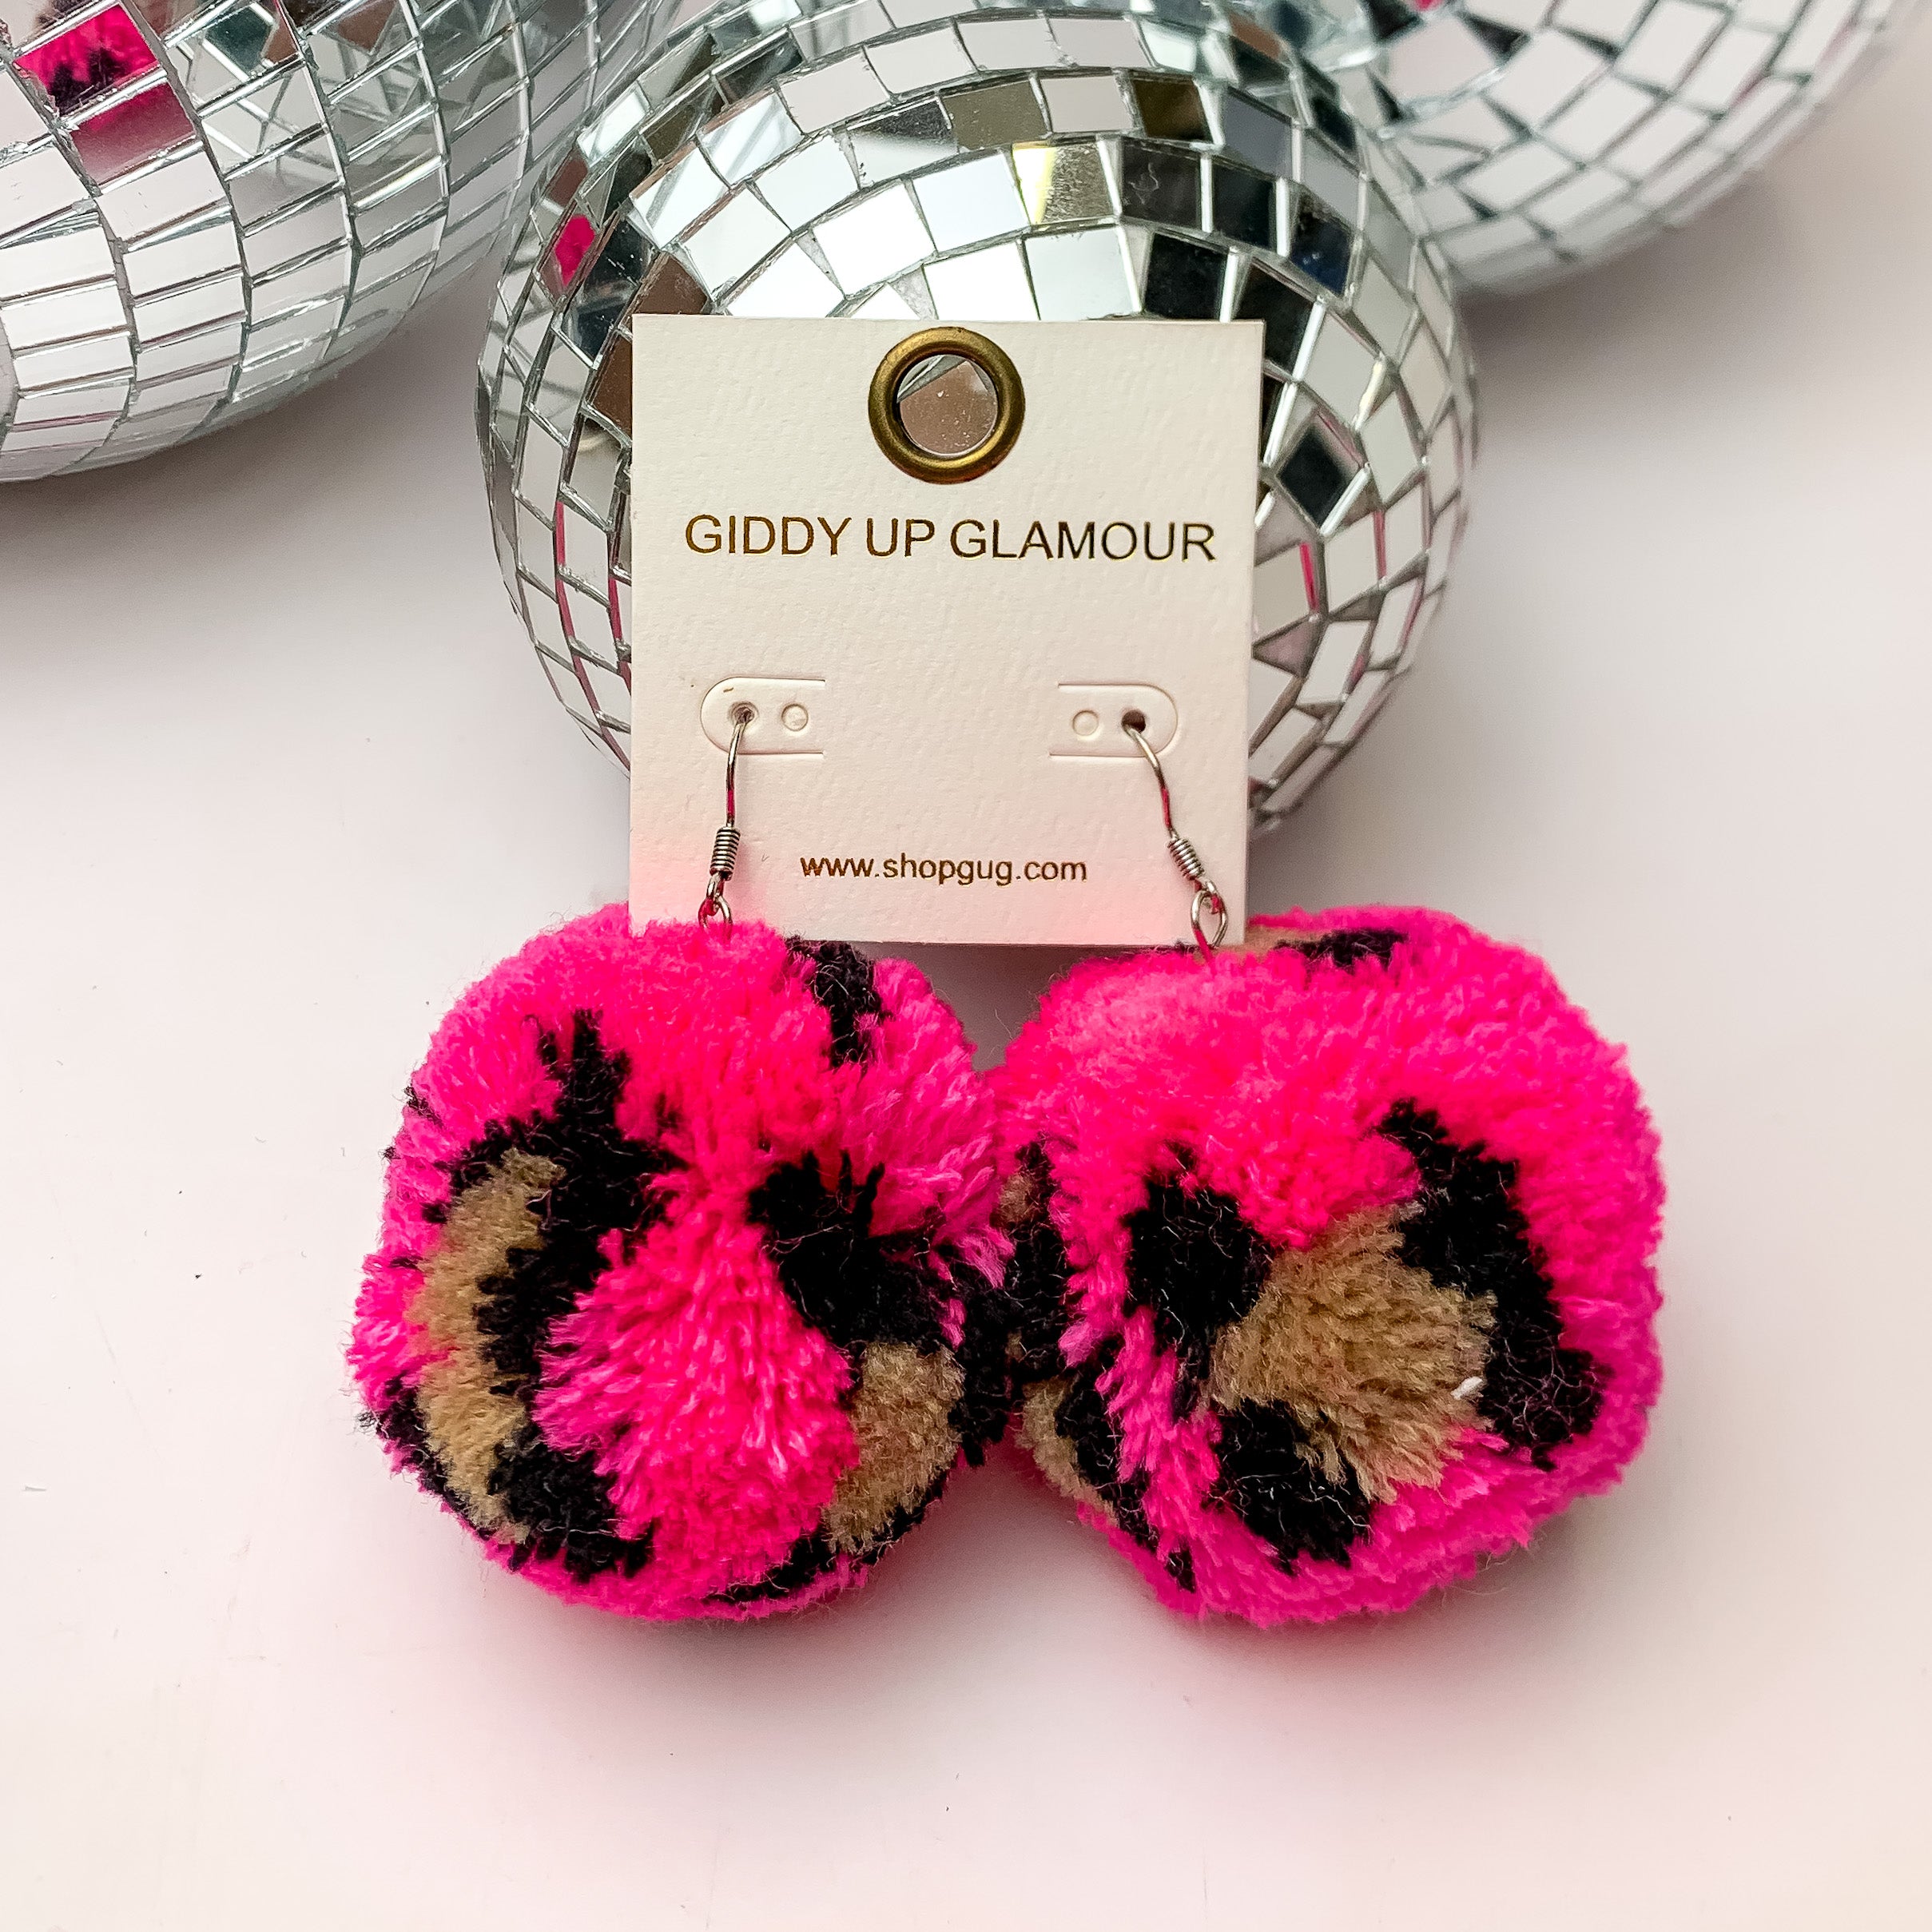 Party Poms Large Leopard Print Earrings in pink. These earrings are on a white background with disco balls above them.